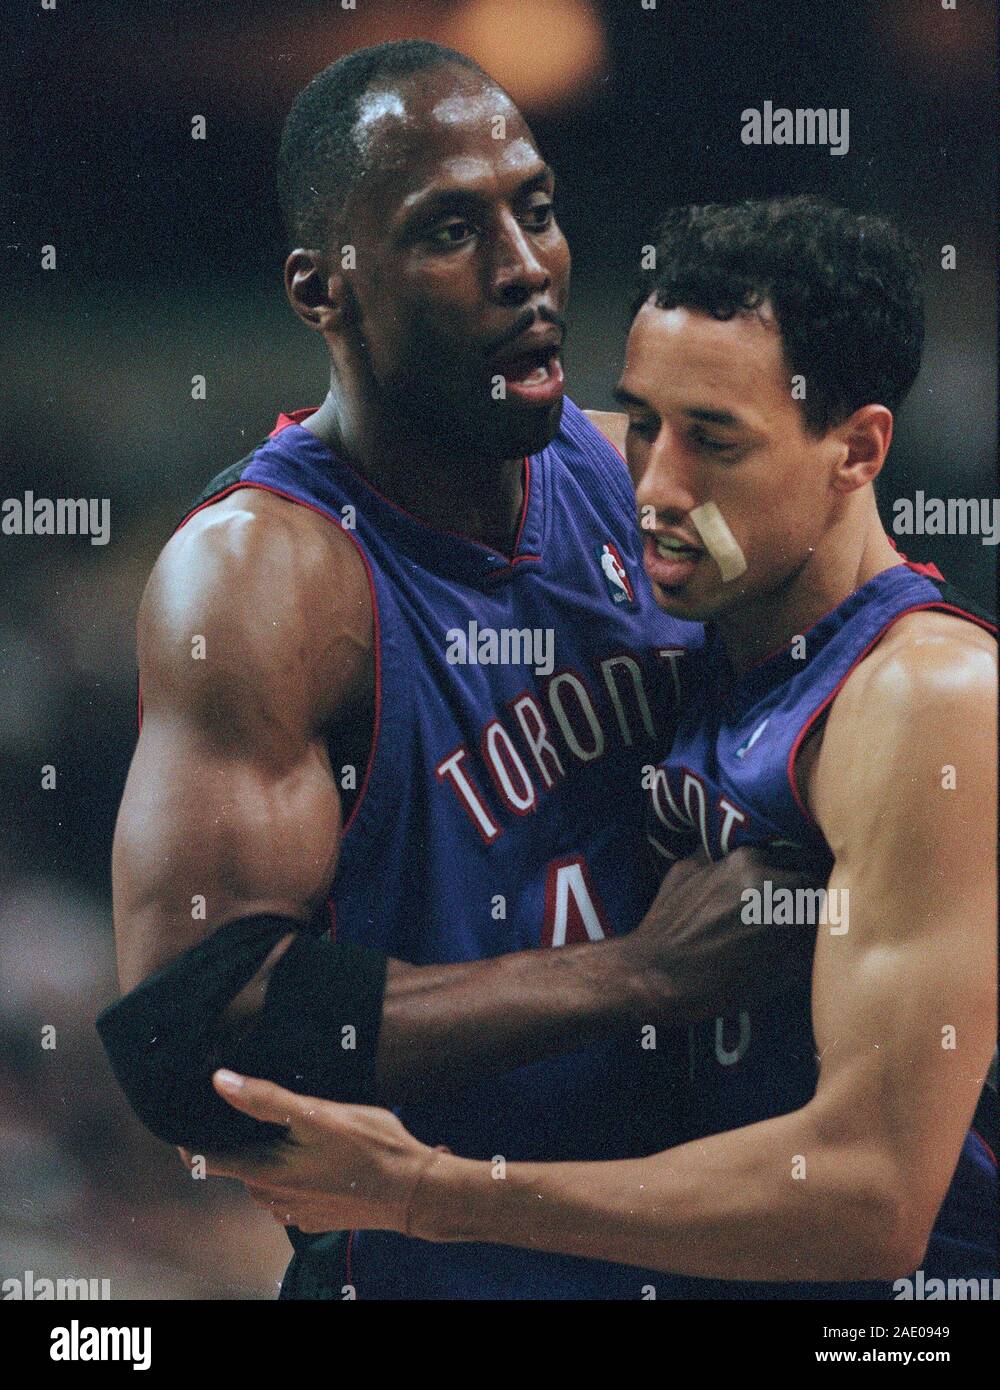 Toronto Raptors Michael Stewart and Doug Christie during basketball game action against the Boston Celtics at the Fleet Center in Boston Ma USA Mar 1,2000 photo by bill belknap Stock Photo